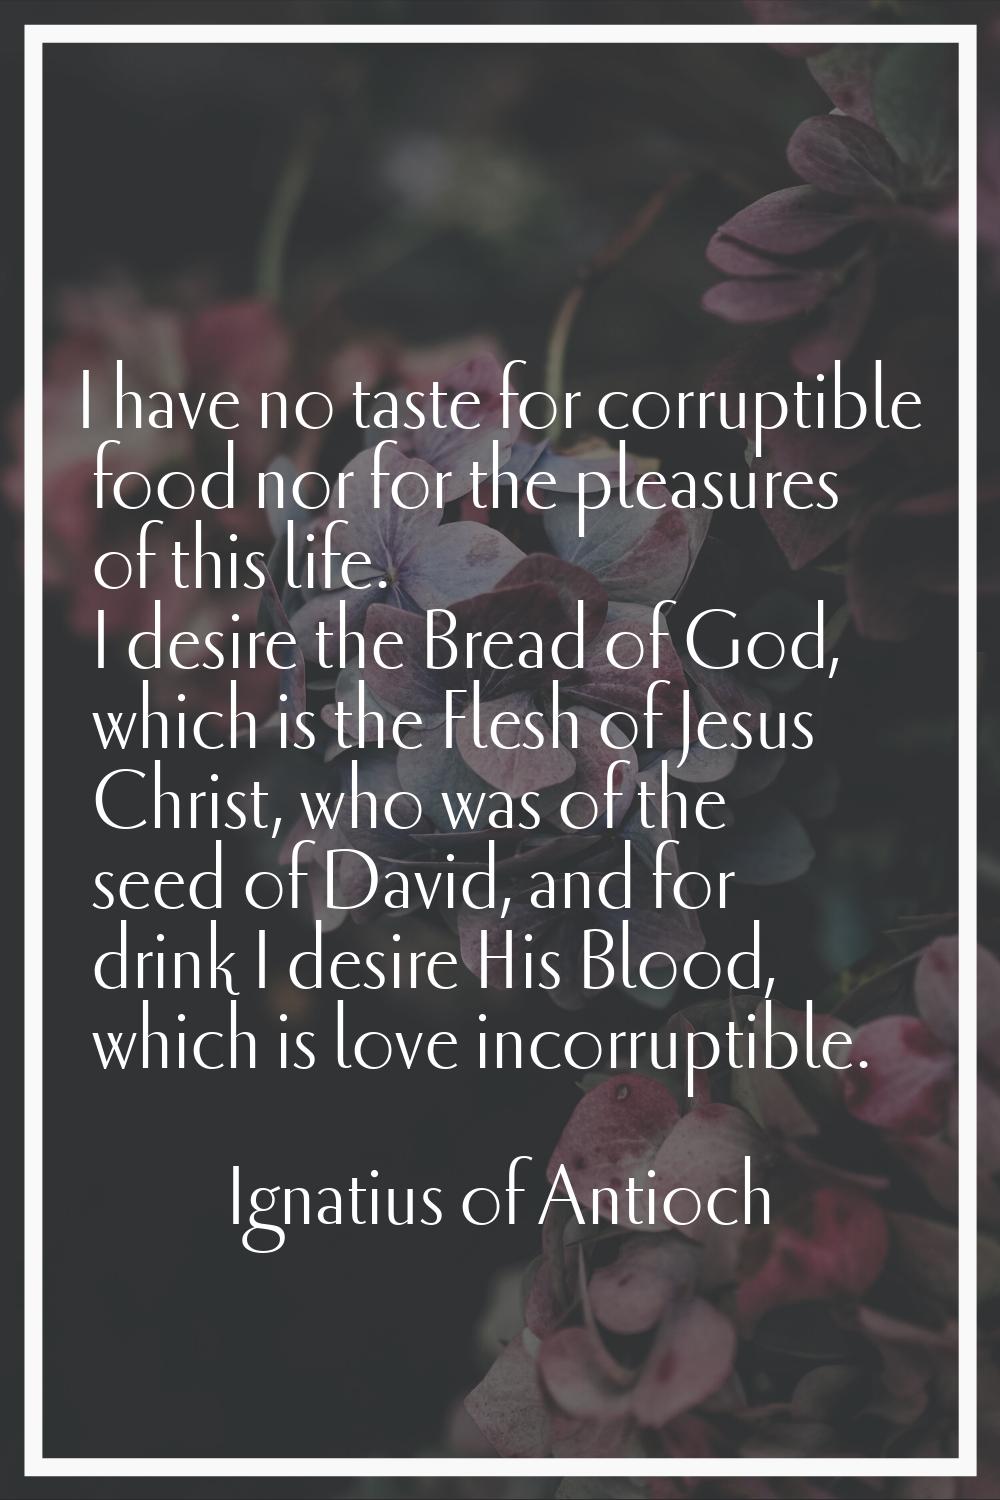 I have no taste for corruptible food nor for the pleasures of this life. I desire the Bread of God,